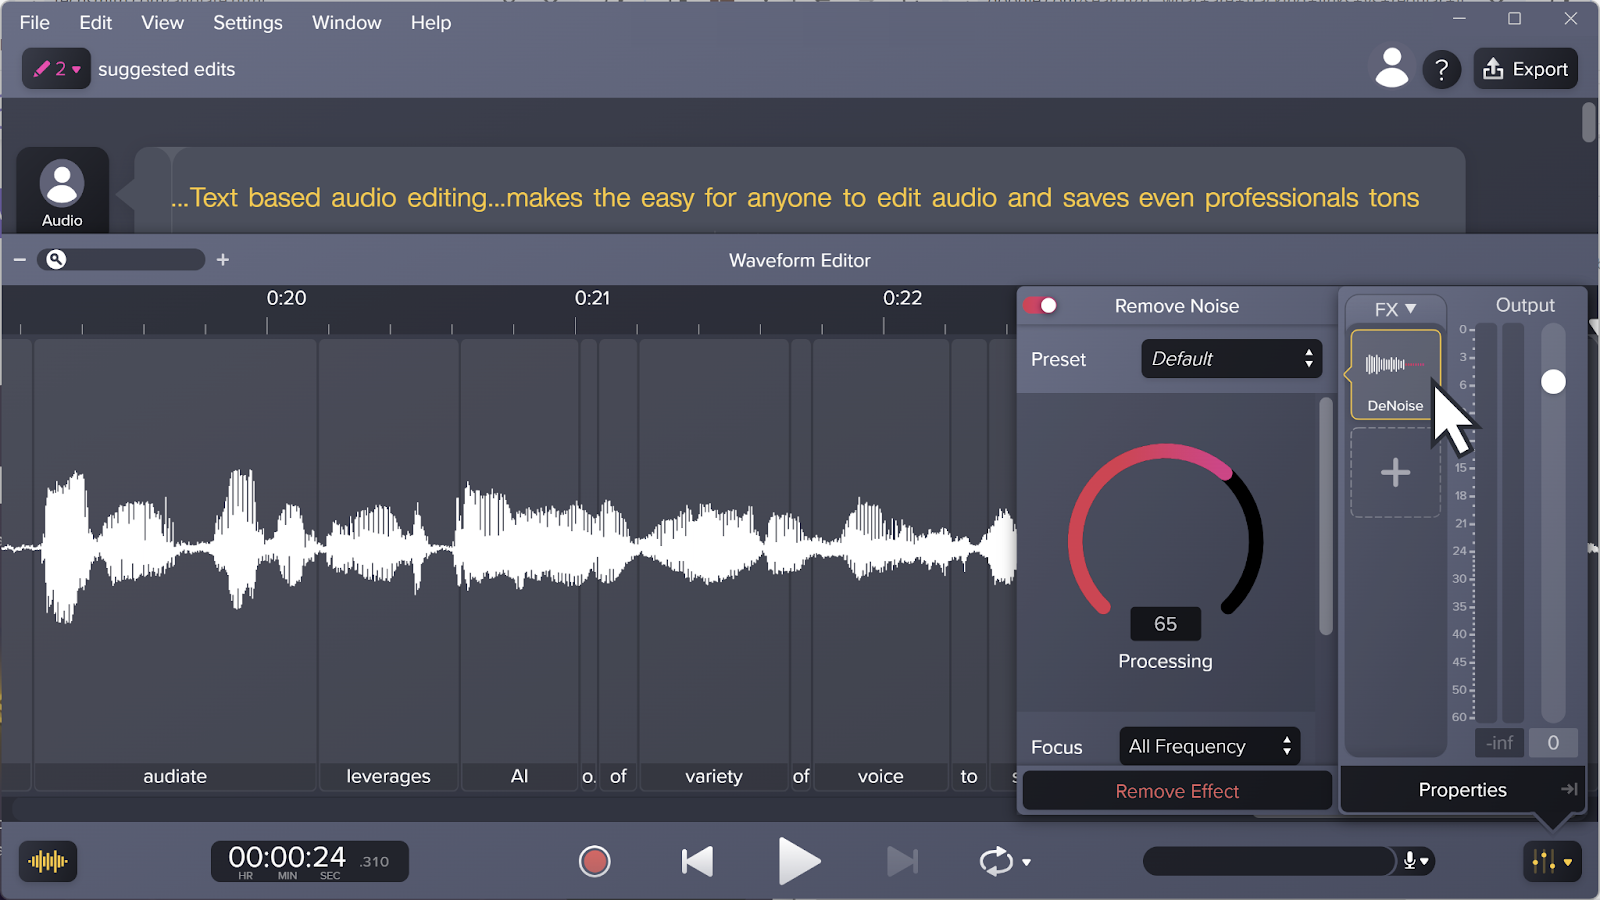 Image of Audiate interface showing how to use the Remove Noise tool to clear up background noise.